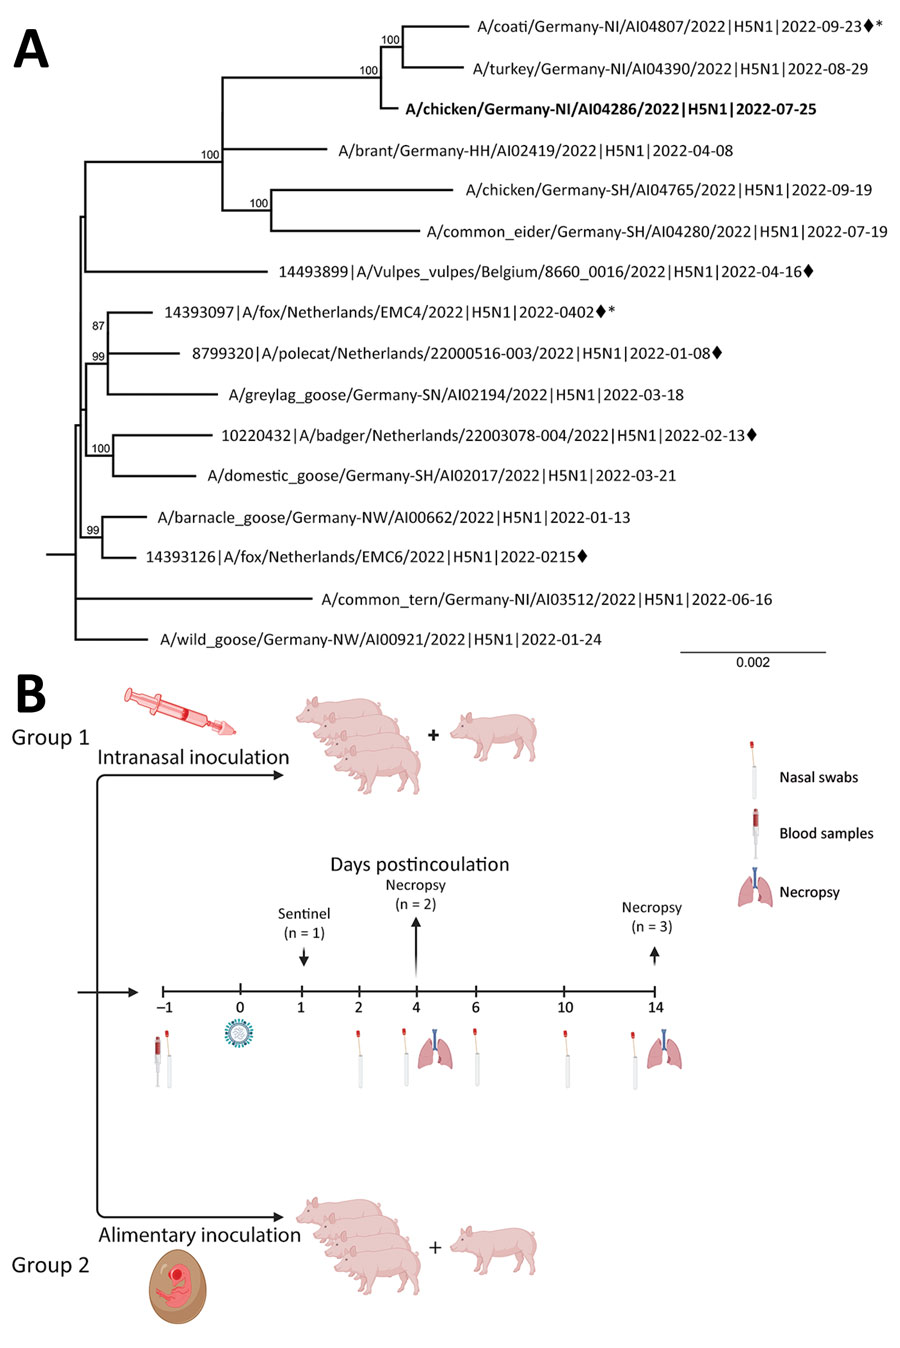 Phylogeny and experimental design for study of susceptibility of pigs against experimental infection with highly pathogenic avian influenza (HPAI) (H5N1) virus clade 2.3.4.4b. A) Maximum-likelihood phylogenetic tree (RAxML, https://cme.h-its.org/exelixis/web/software/raxml) based on 8 concatenated genome segments of selected recent HPAI H5N1 viruses from naturally infected avian hosts and from mammalian hosts (black diamonds) in Europe. Bold indicates study isolate A/chicken/Germany/AI04286/2022. Asterisks (*) indicate sequences with polymerase basic 2 E627K mutations. B) Scheme of the experimental setting of HPAI H5N1 virus infection of pigs. Four pigs, 4 months of age, were inoculated with 106 TCID50 in 2 mL using mucosal atomization devices. Four pigs were each fed with 1 HPAI H5N1 virus–infected embryonated chicken egg, carrying ≈108–109 TCID50/mL of allantoic fluid. Each pig was offered an egg, separately, in a trough and observed to complete consume it. Ten-day-old eggs were inoculated with 0.2 mL of clarified amnio-allantoic fluid of egg passage 1 and incubated for 3 days or until embryonic death was evident. Eggs were chilled until fed to pigs. Panel B created with BioRender.com and licensed by the company (agreement no. UC258UM8J3). TCID50, 50% tissue culture infectious dose.